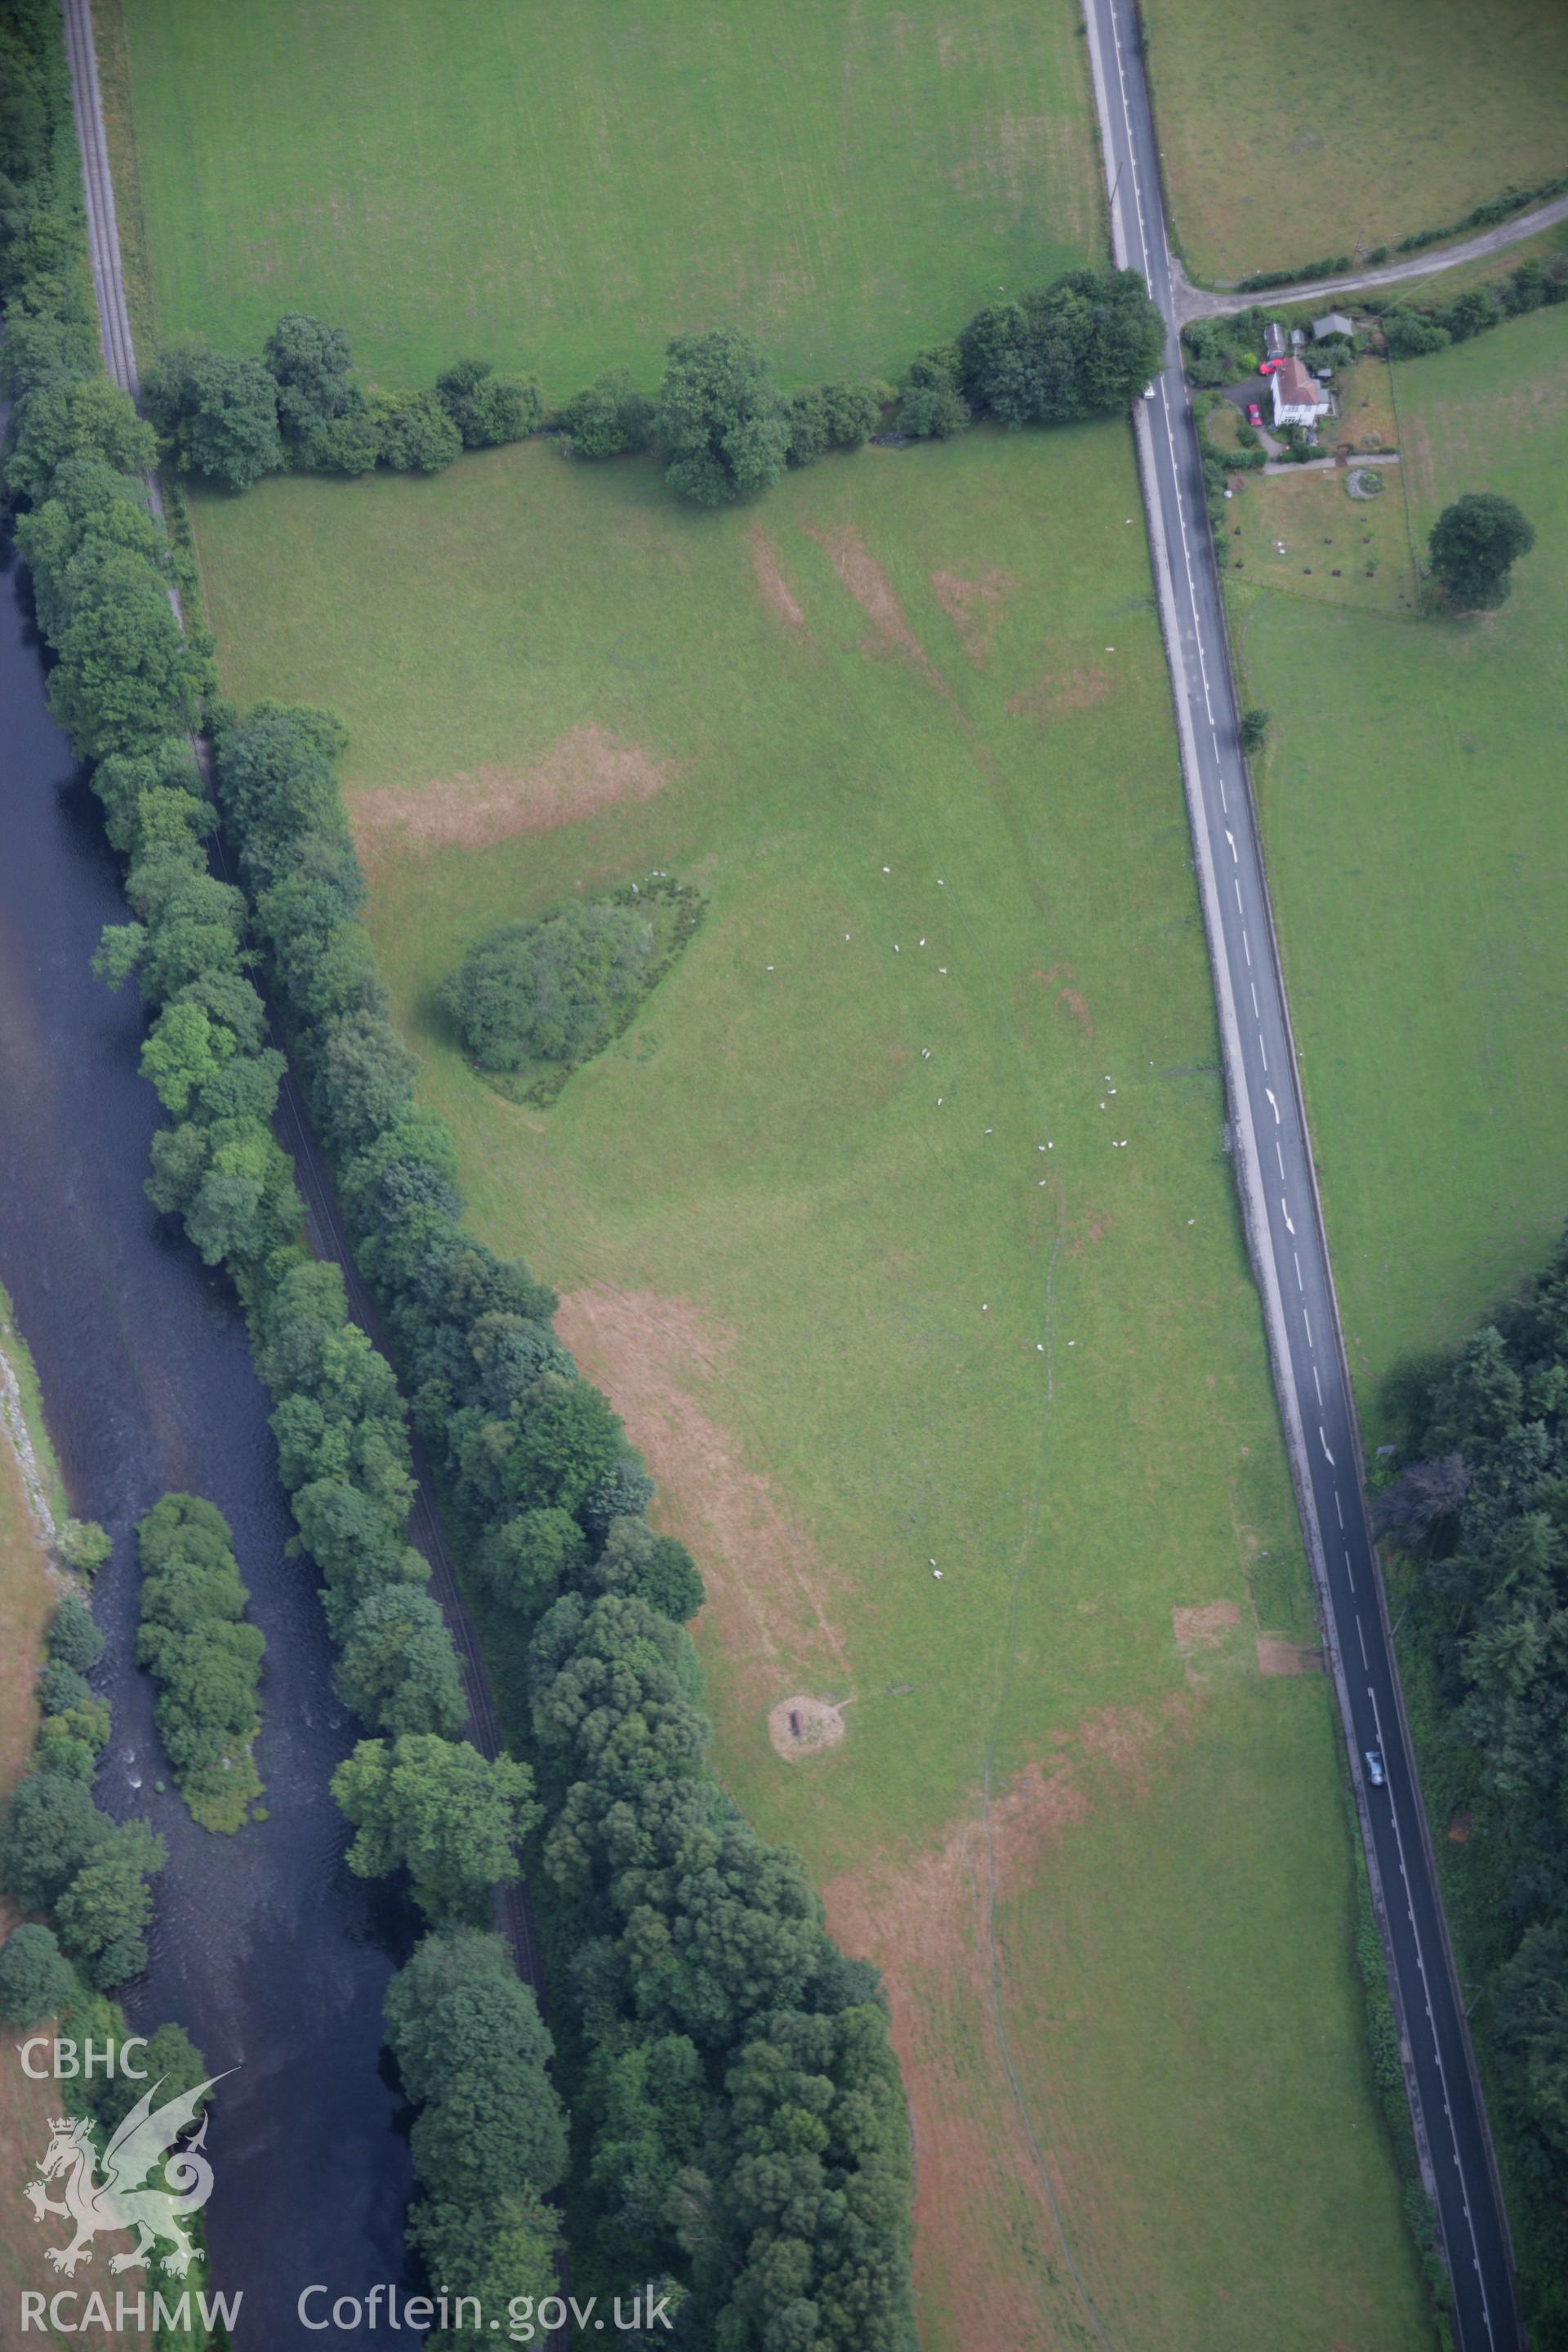 RCAHMW colour oblique aerial photograph of Owen Glyndwr's House Moat. Taken on 31 July 2006 by Toby Driver.